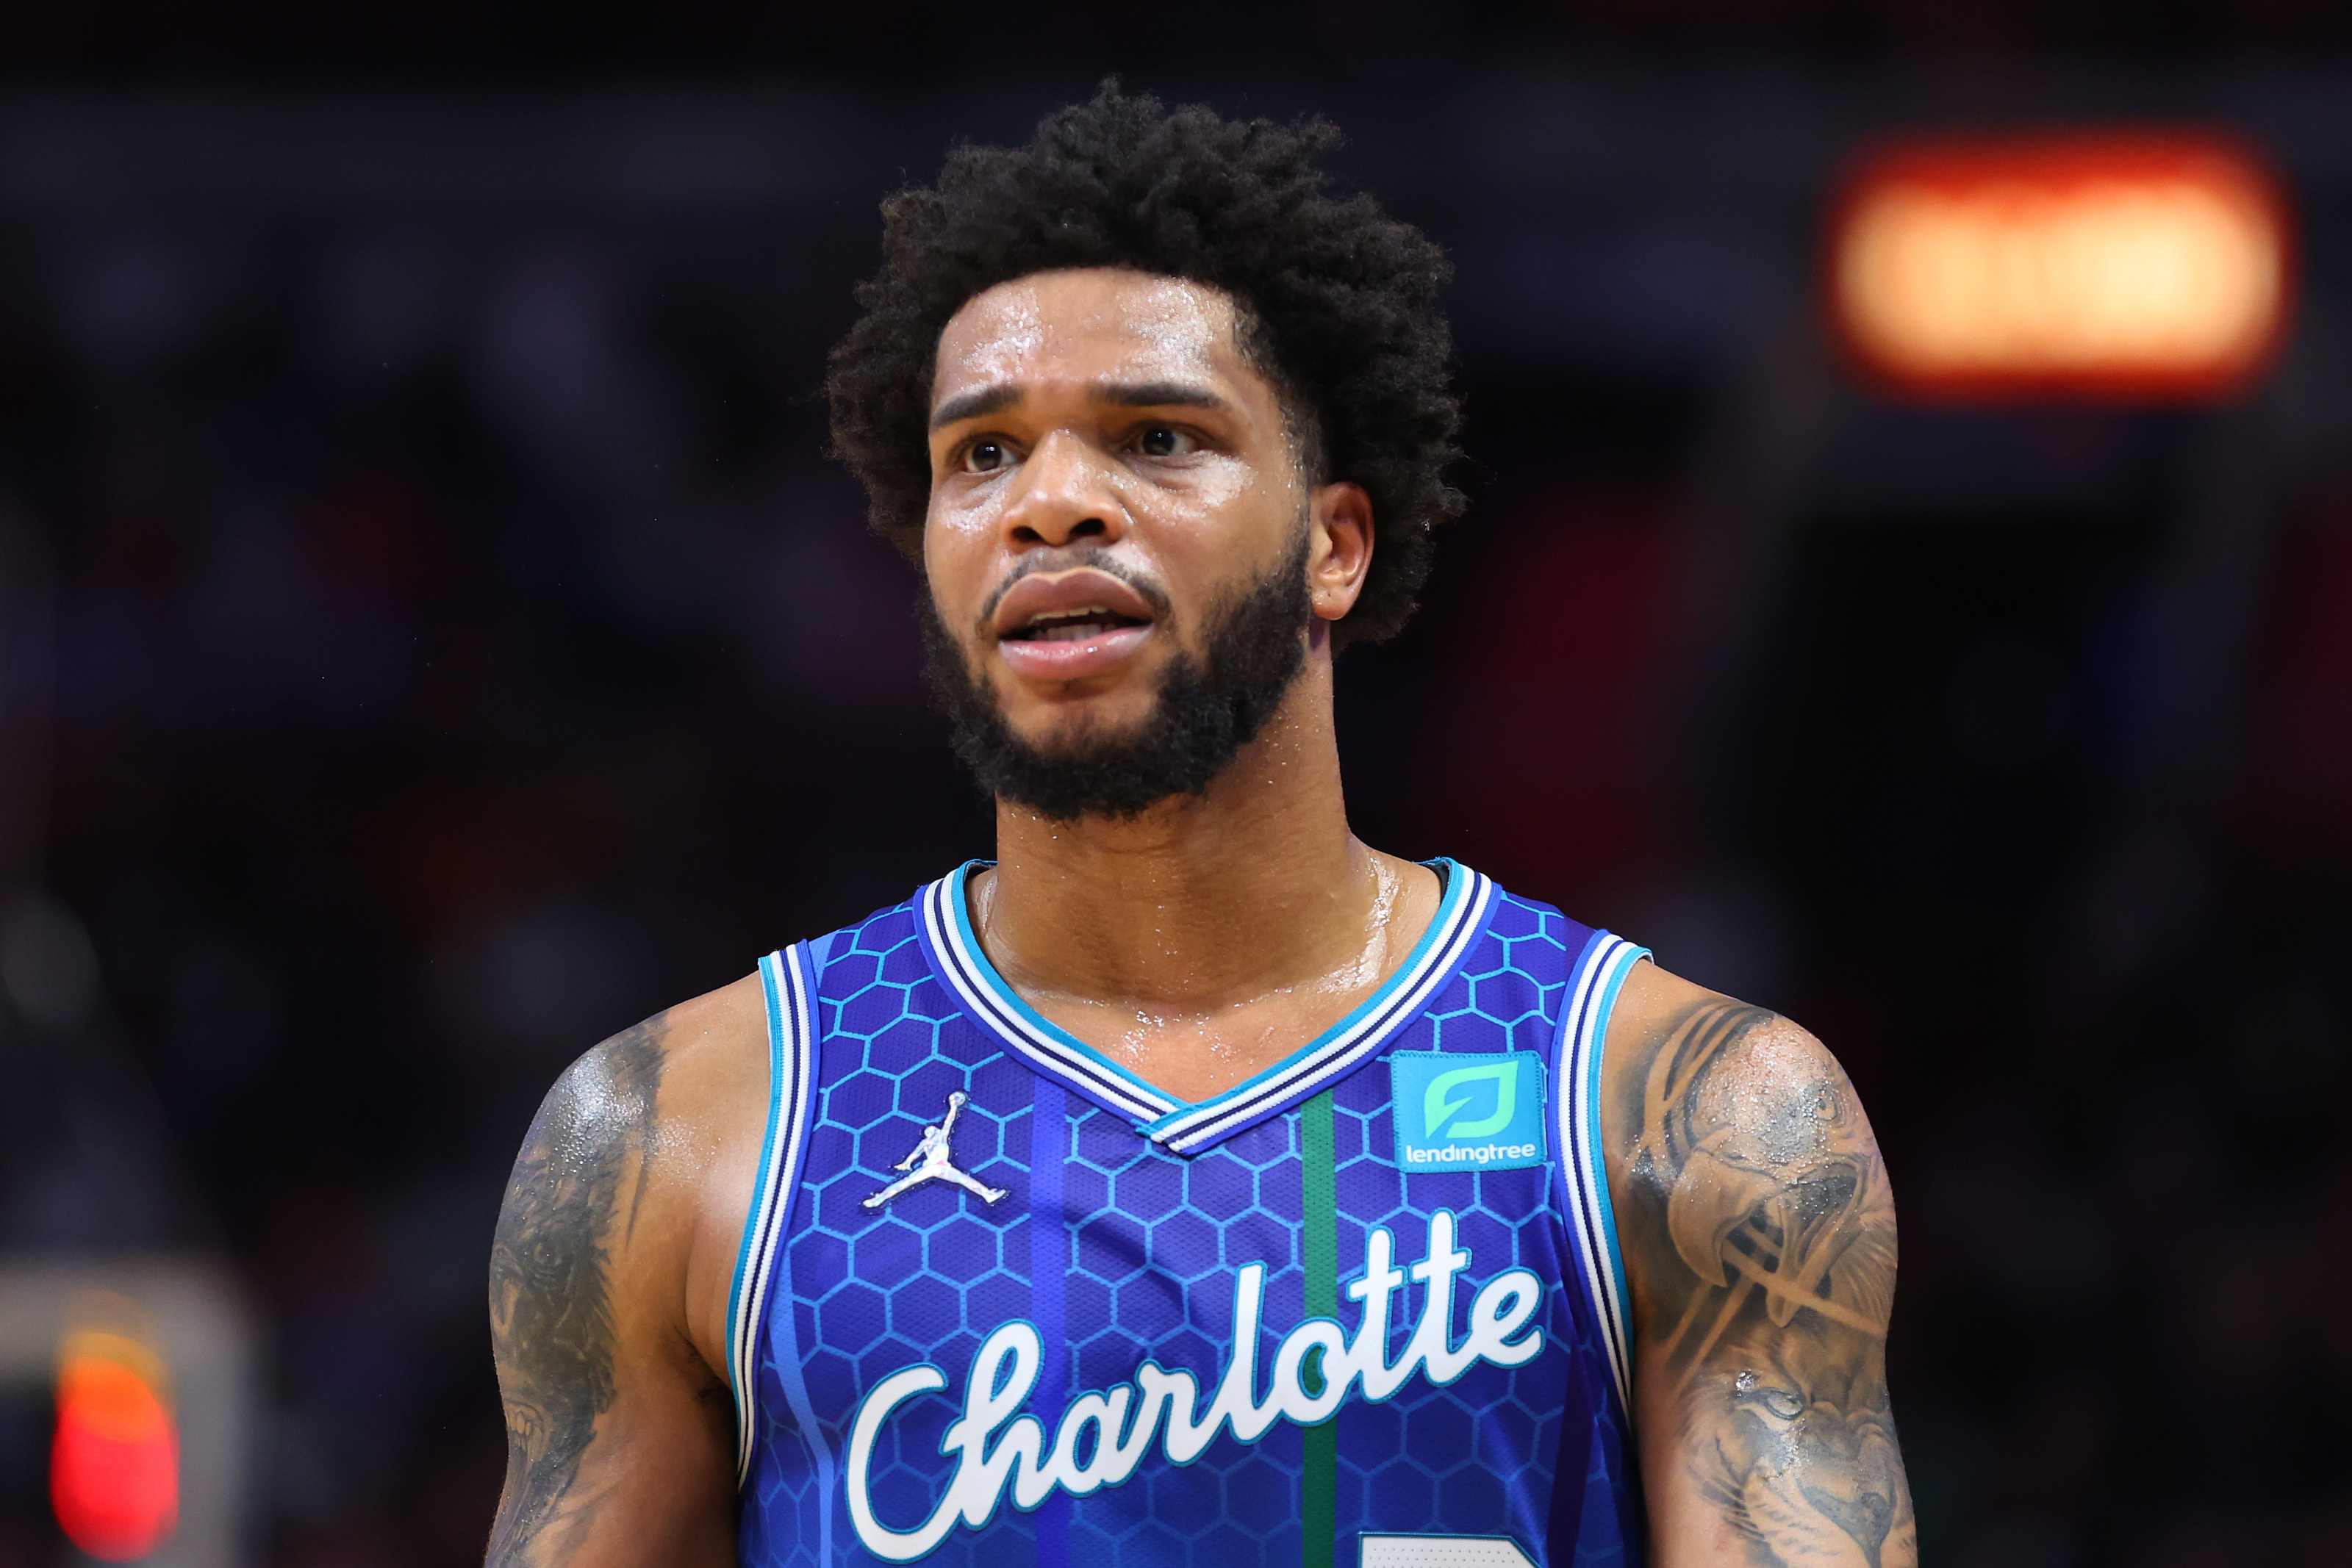 Adrian Wojnarowski on X: The Charlotte Hornets are launching a